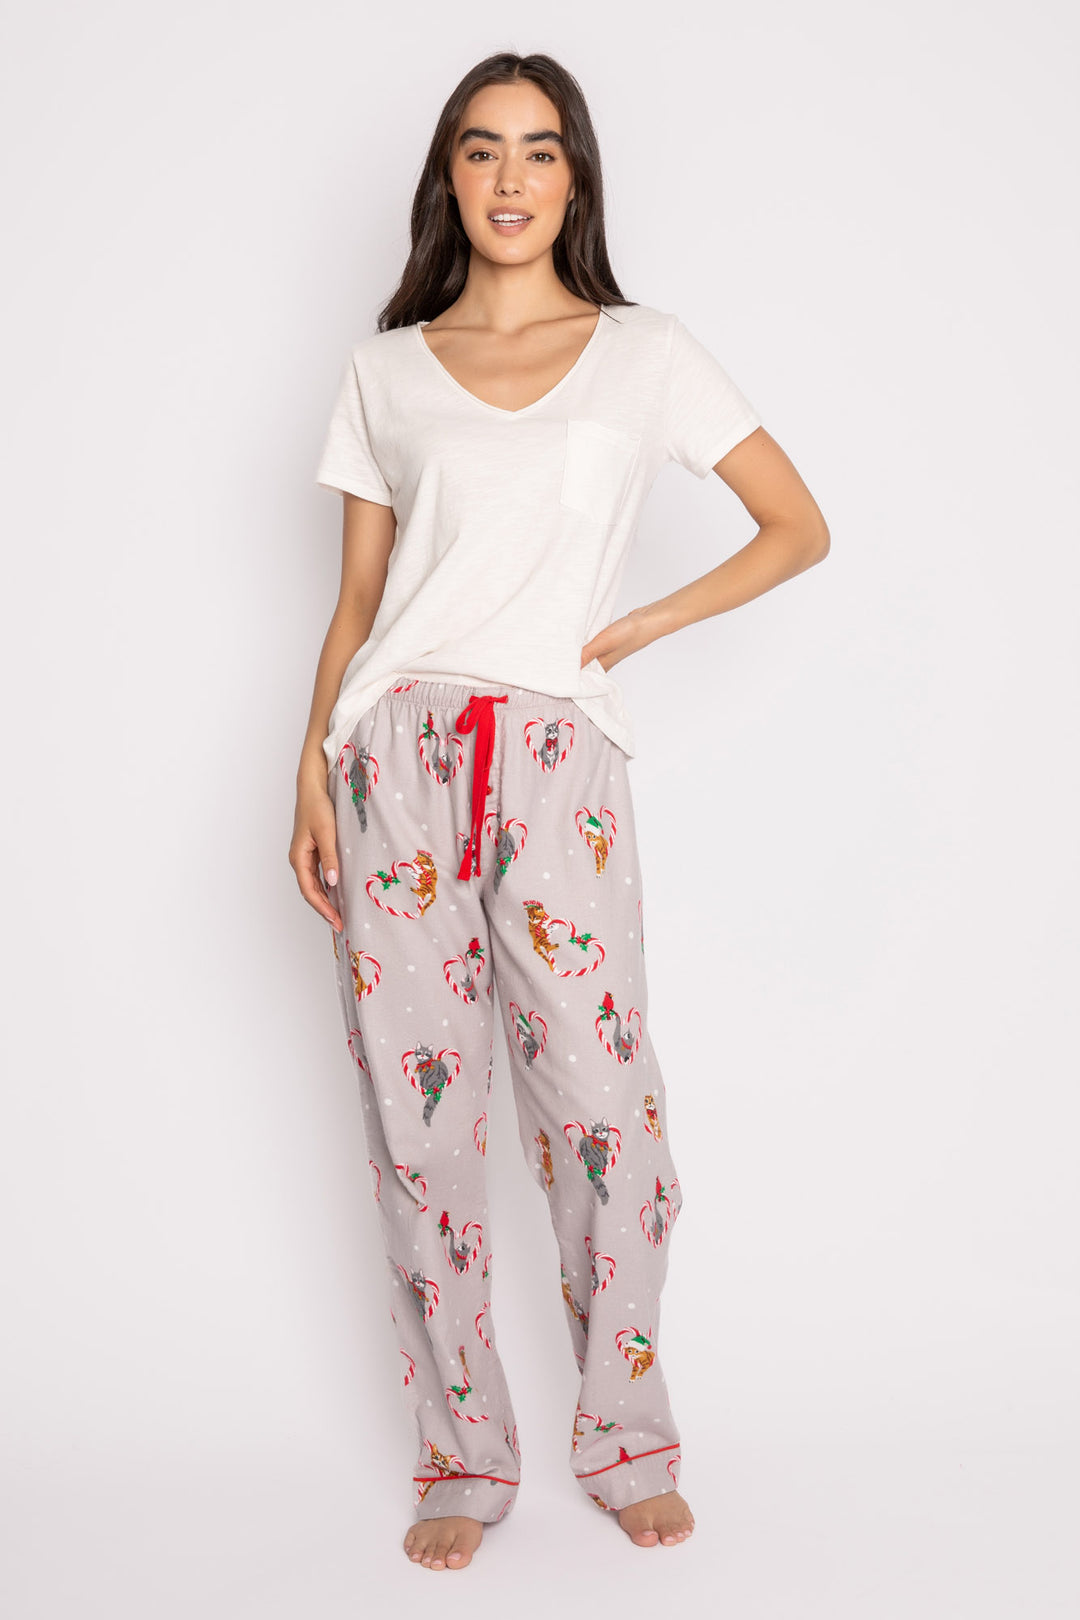 Cotton flannel pajama pant. Grey holiday cat-theme print. Relaxed with tie waist. (7257678610532)